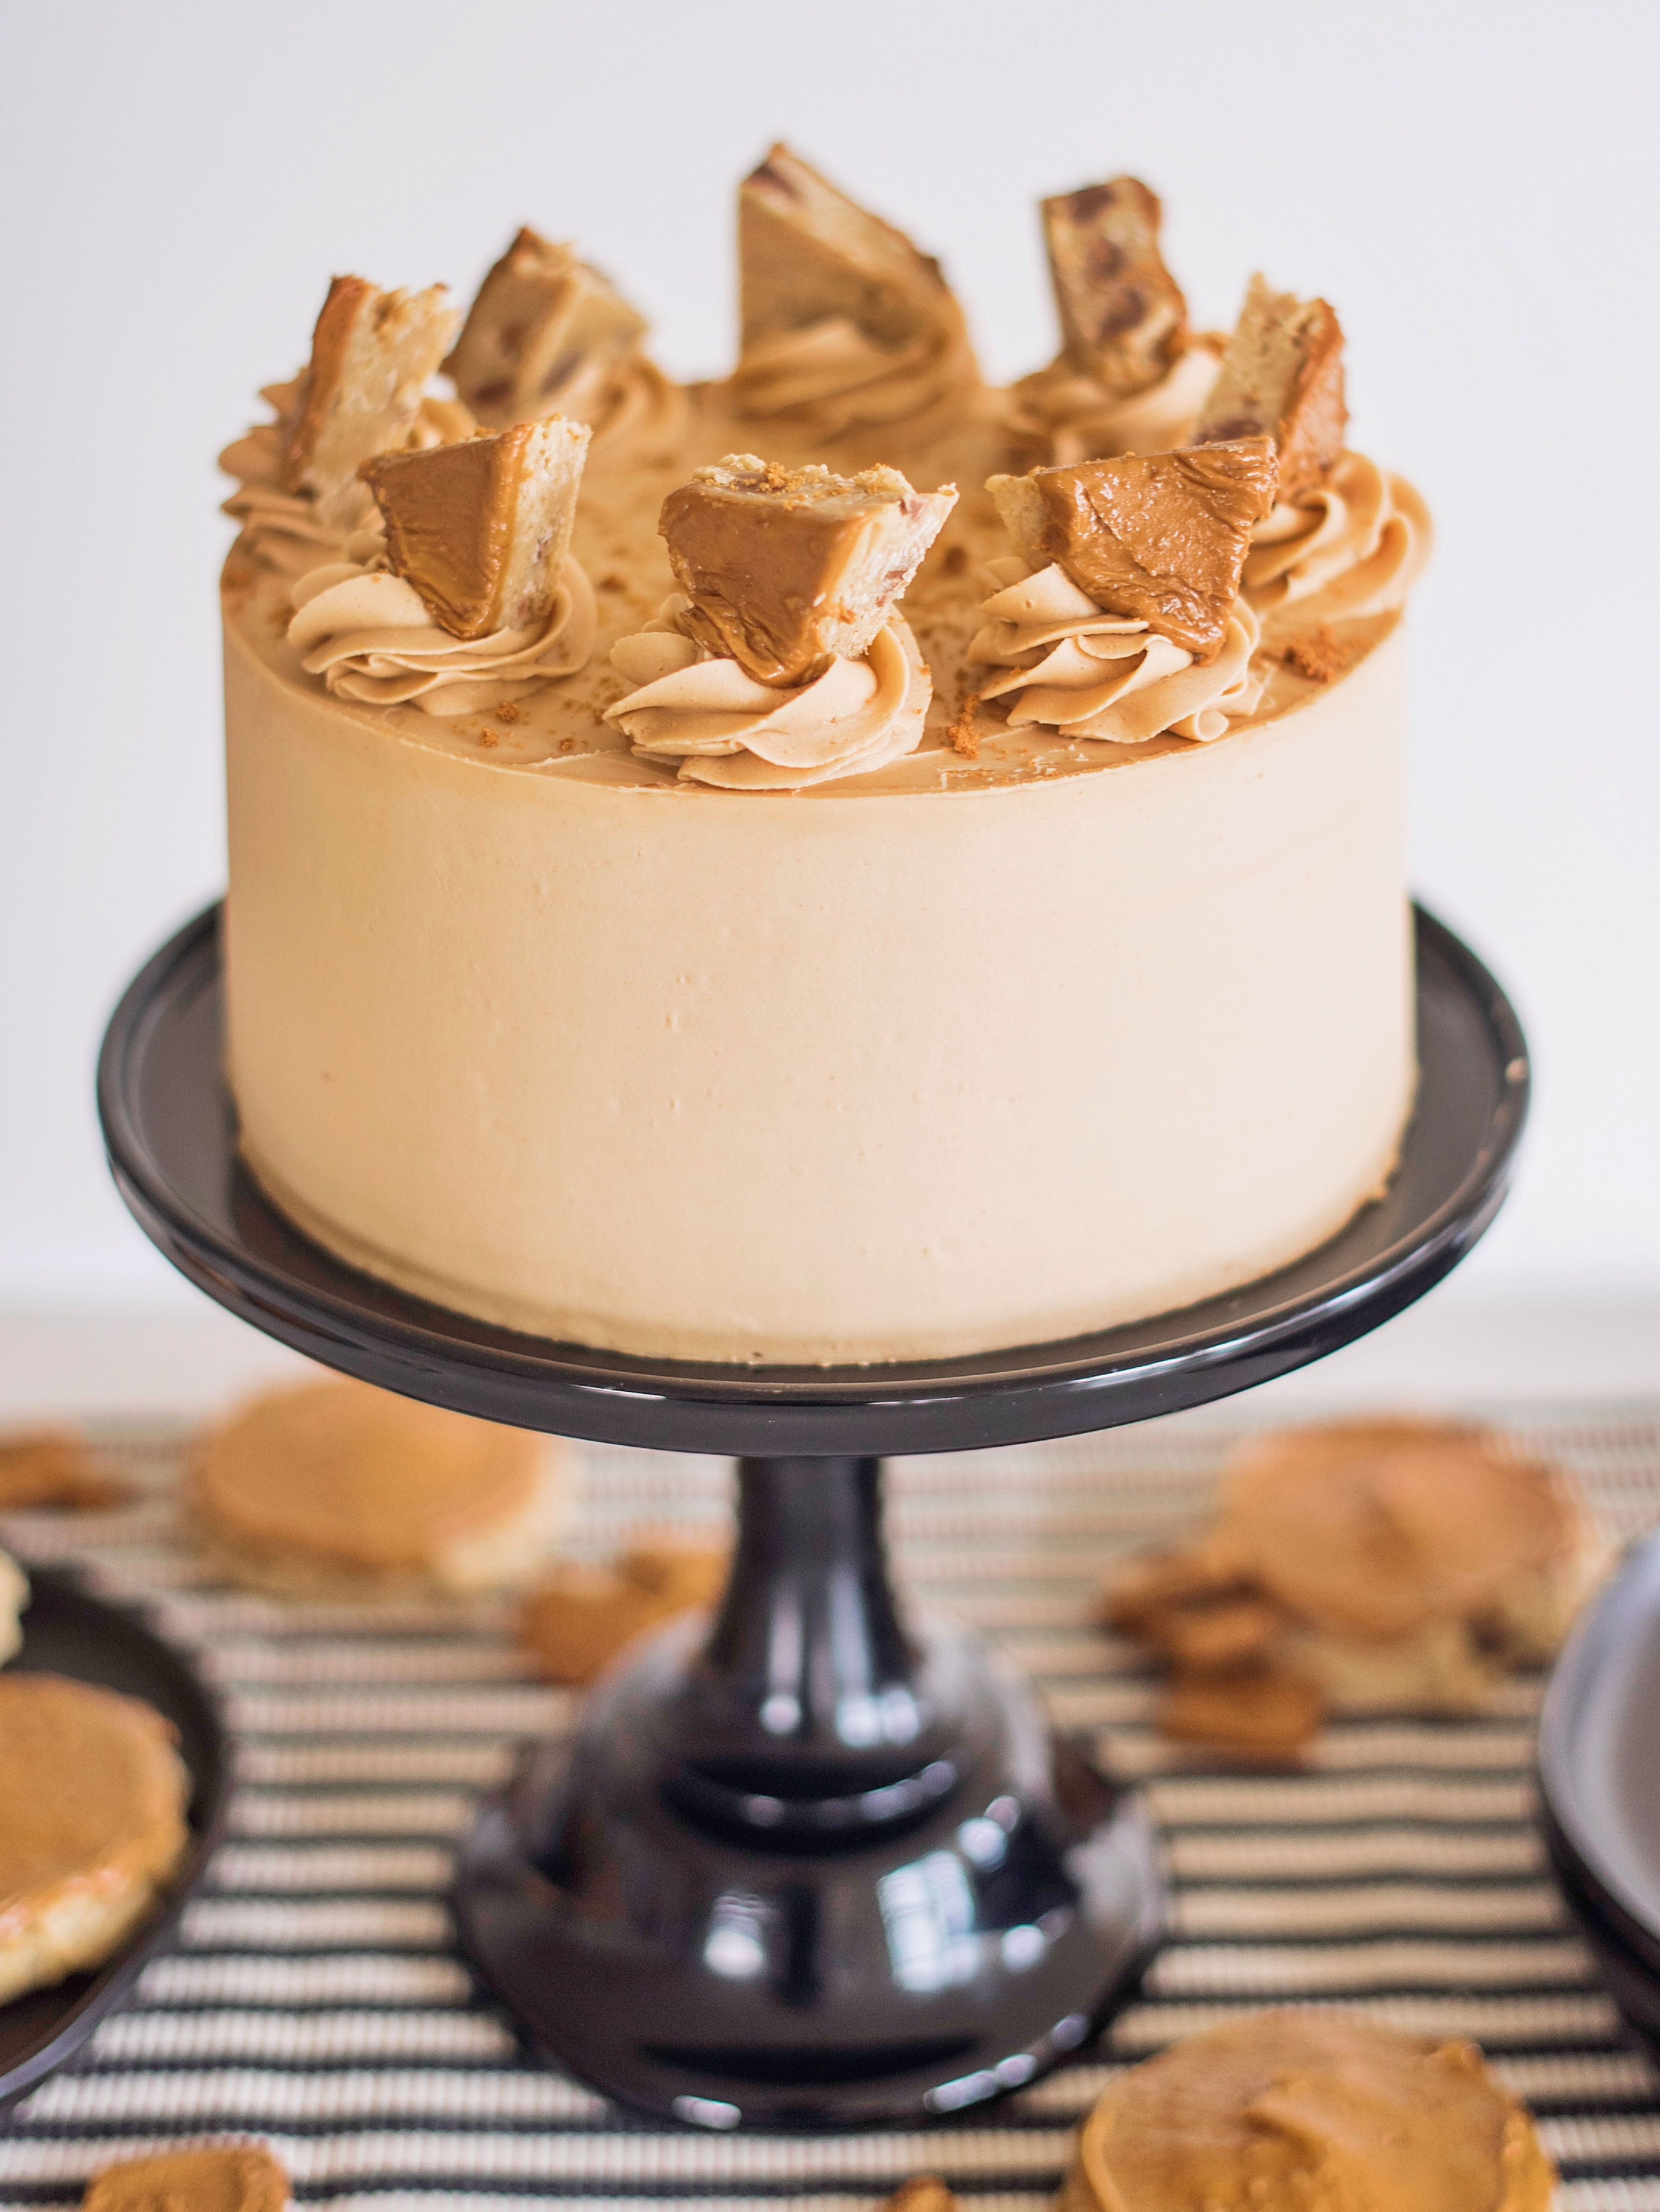 Biscoff cake on a black cake stand with cookies.